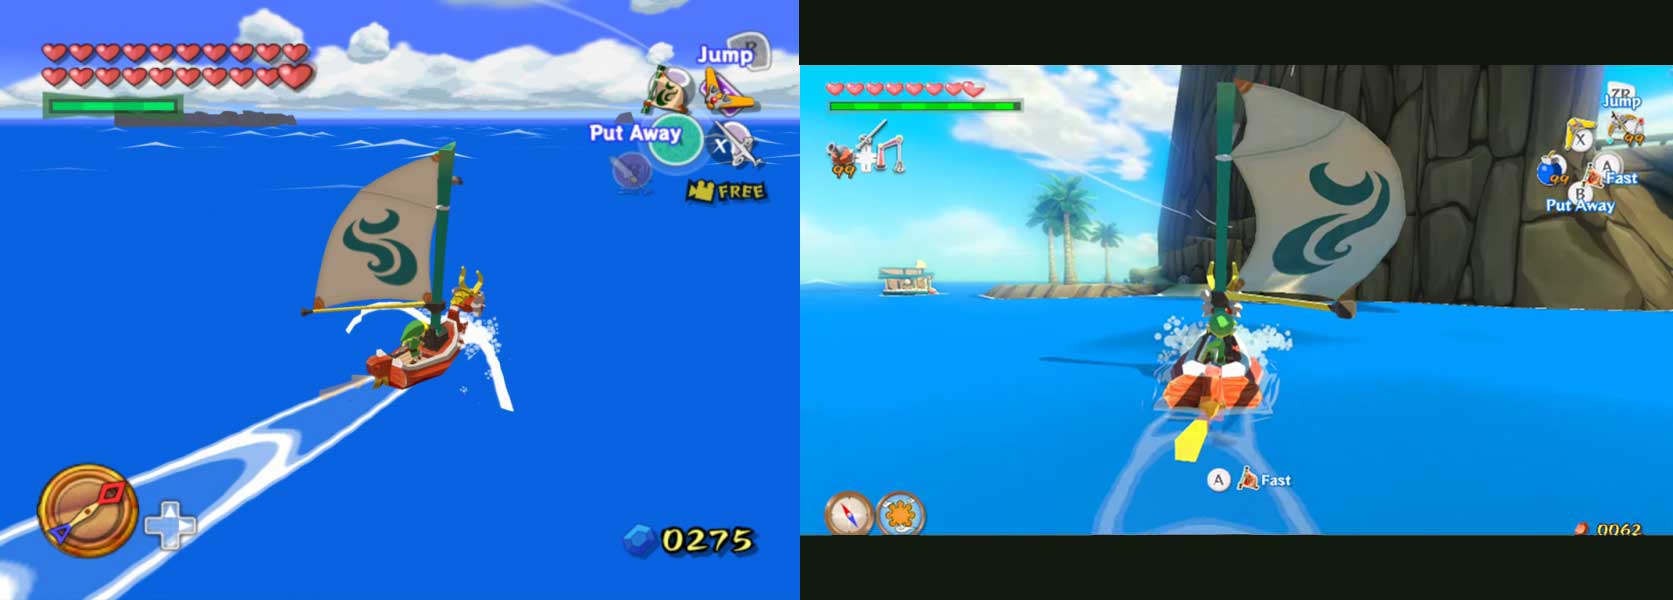 The GameCube’s version (sub-HD with original HUD) on the left and the 1080p Wii U HD-edition on the right.